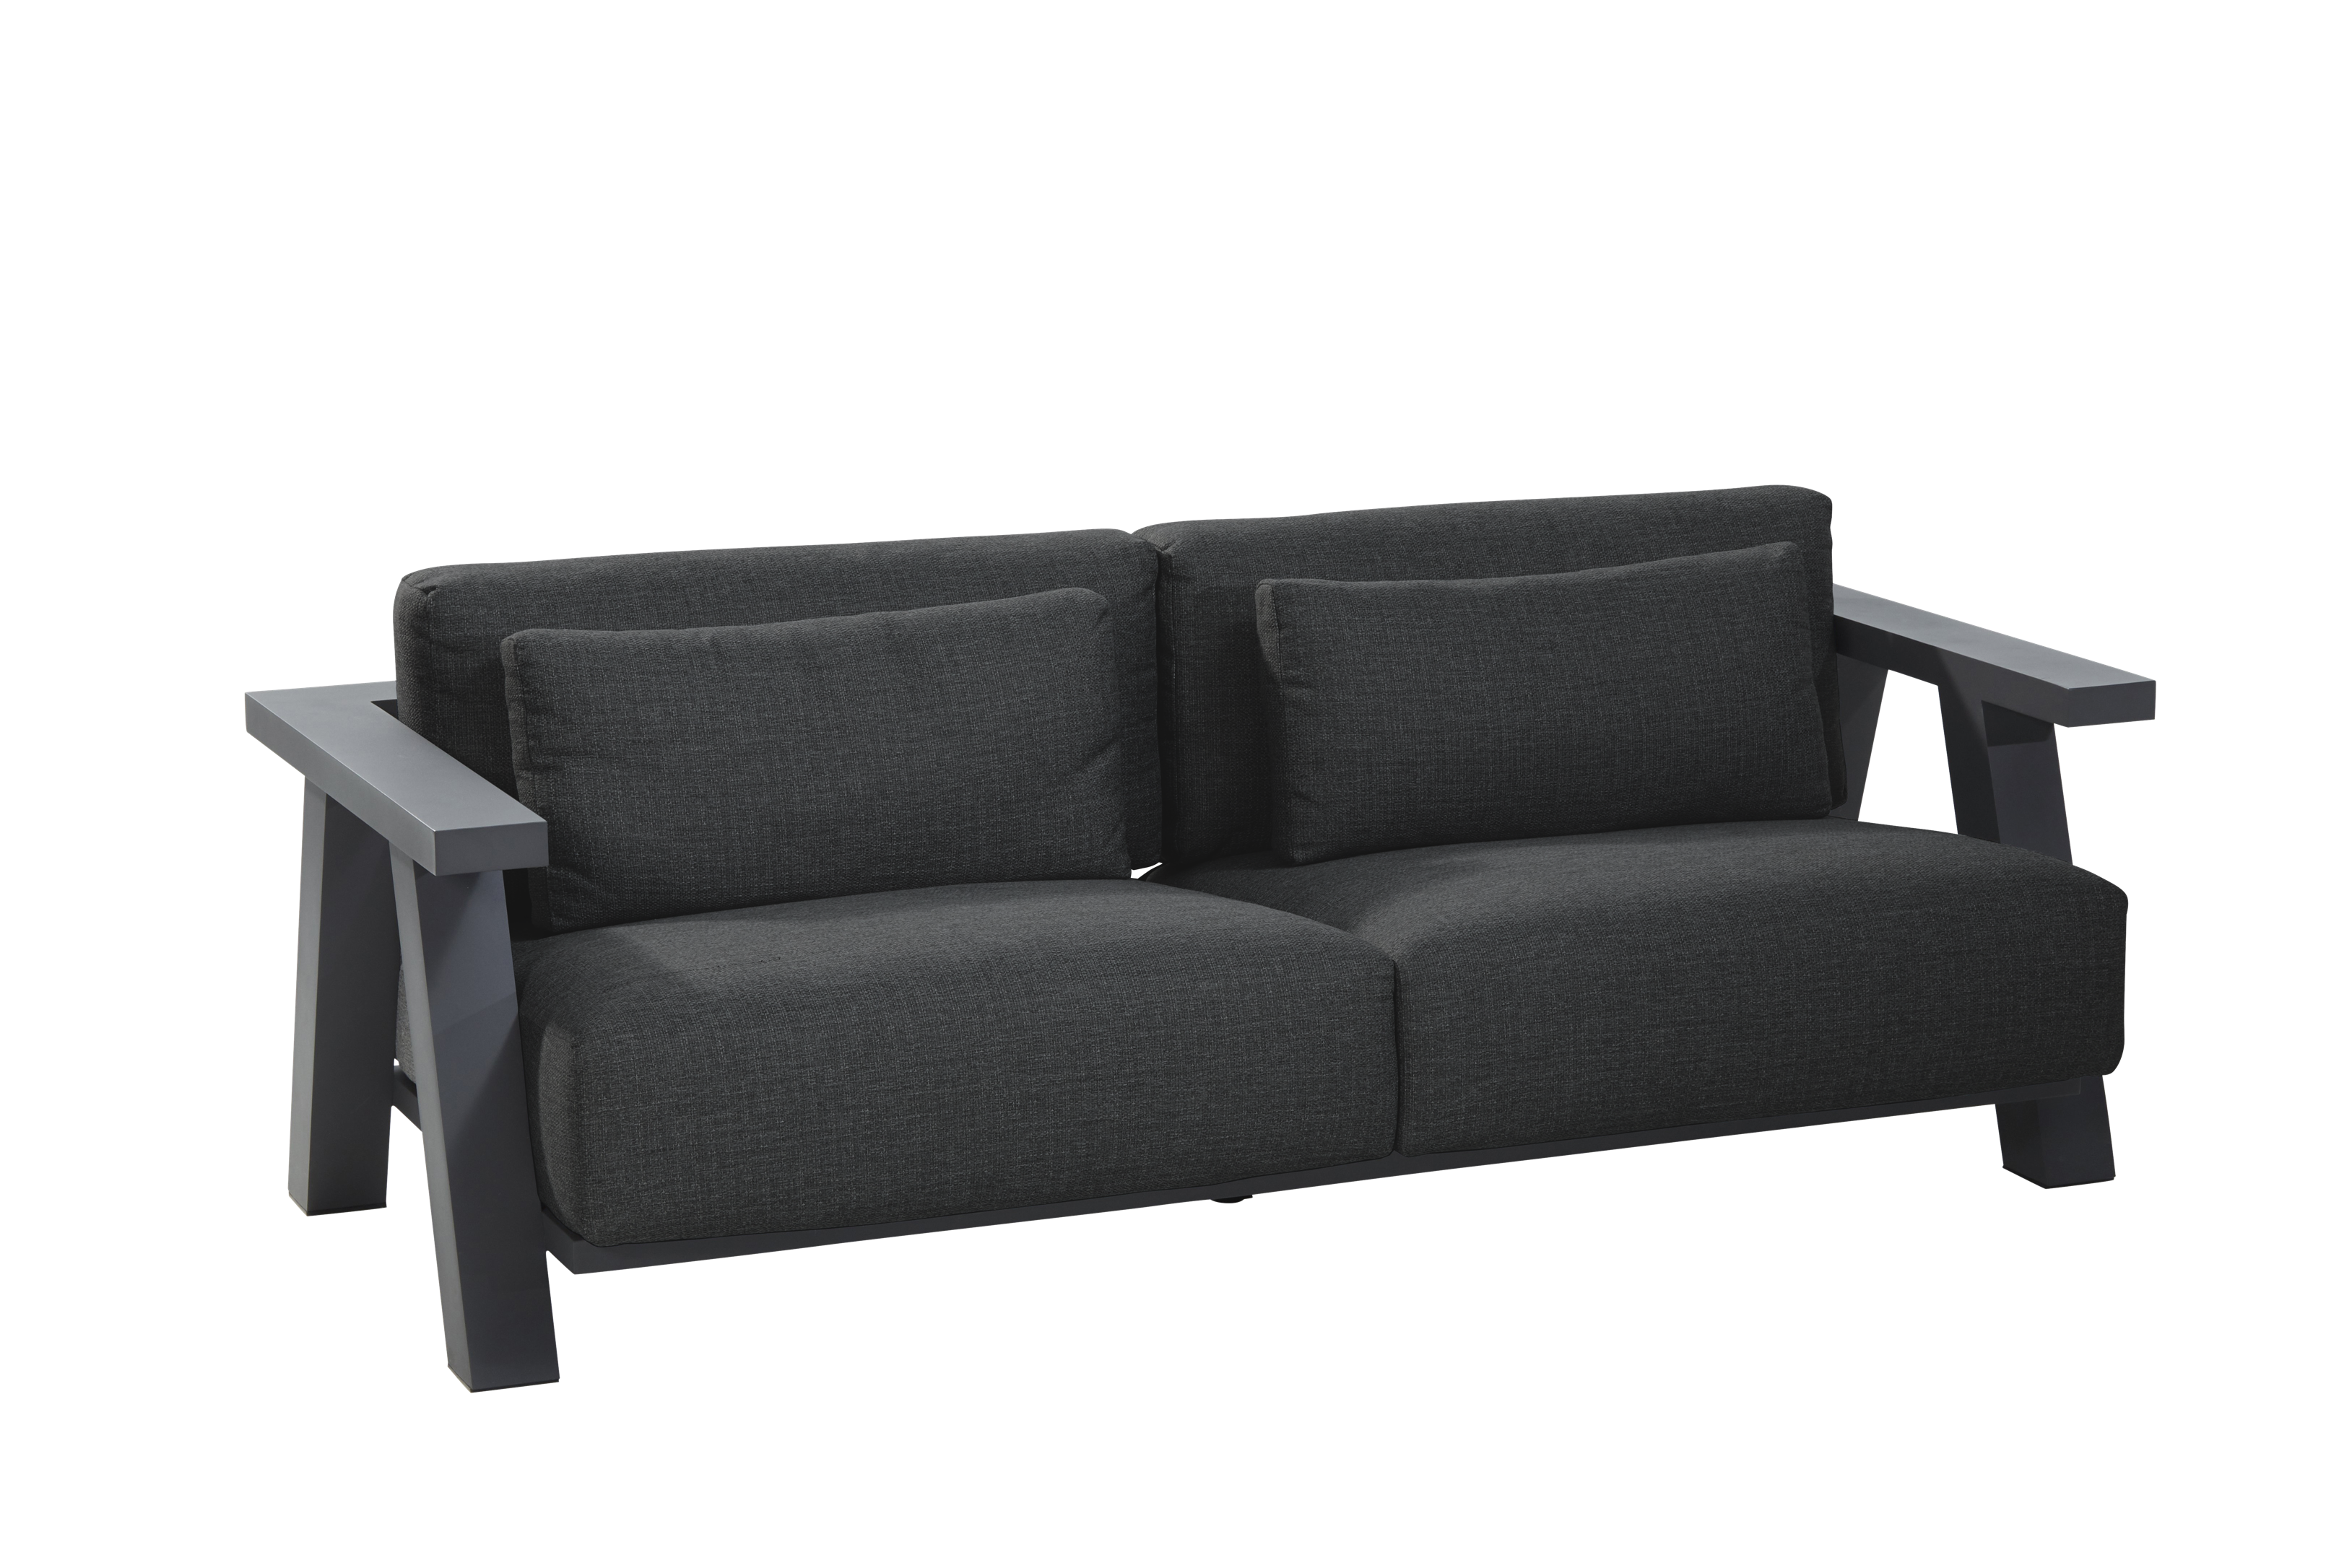 4 Seasons Outdoor Iconic Living Bench 3 Seater With 4 Cushions & 2 Pillows